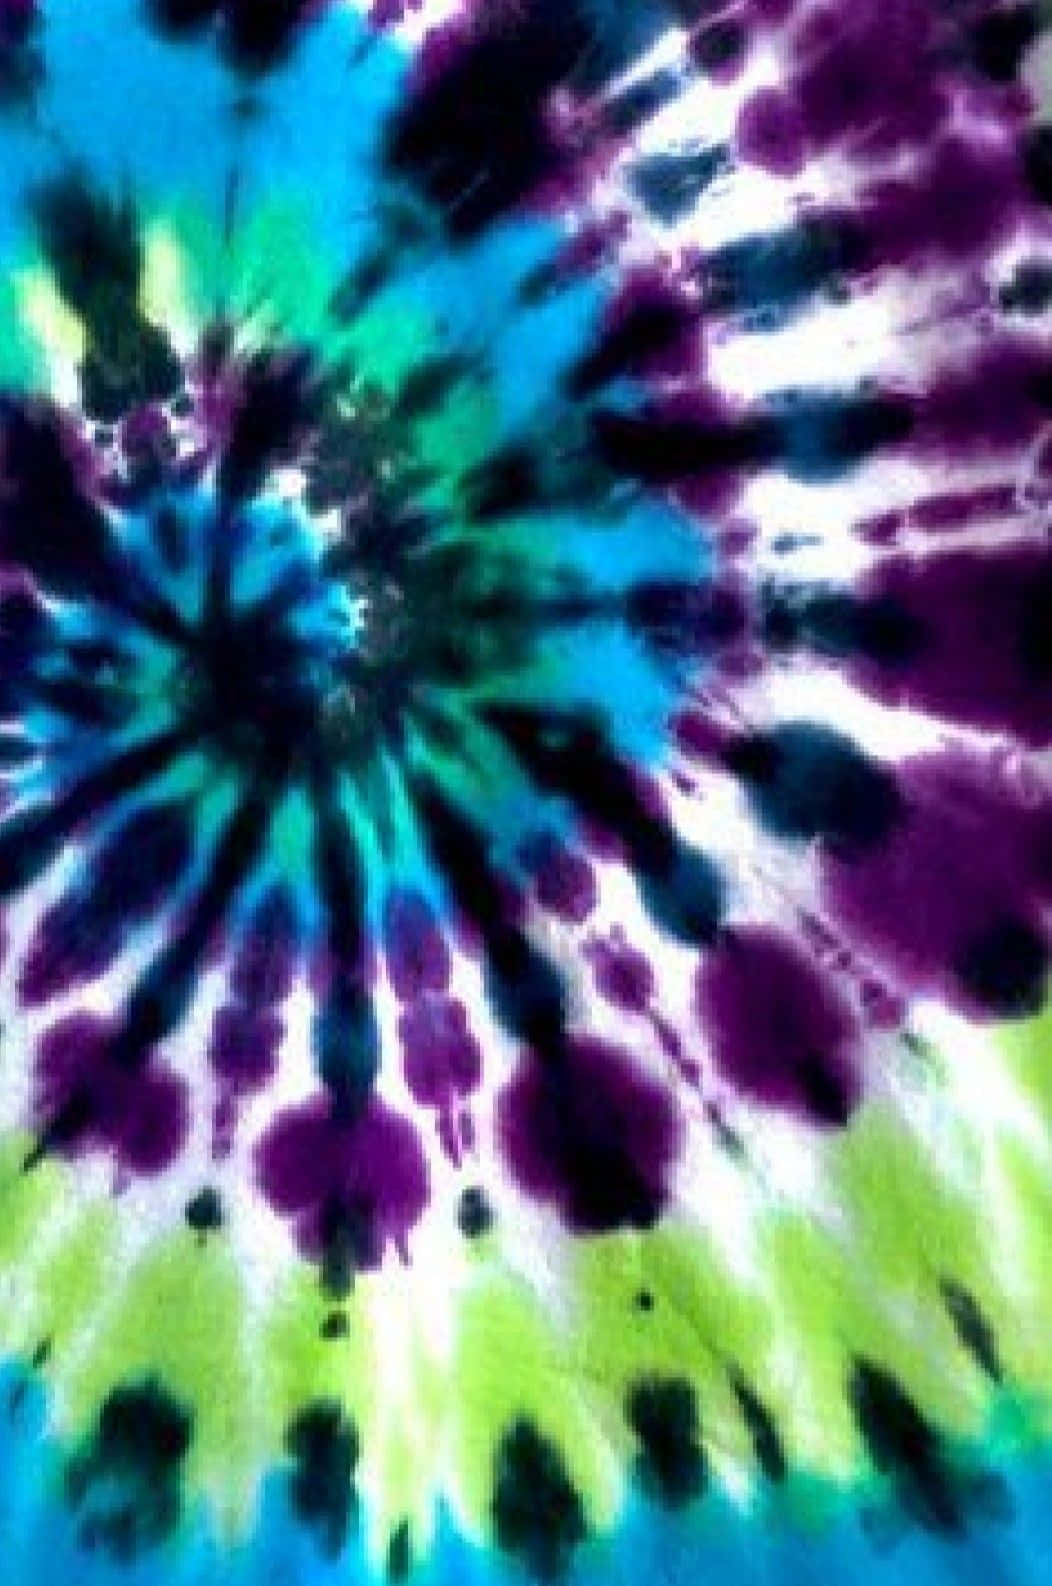 4 Tie dye psychedelic background images in the colour combination  orange-blue